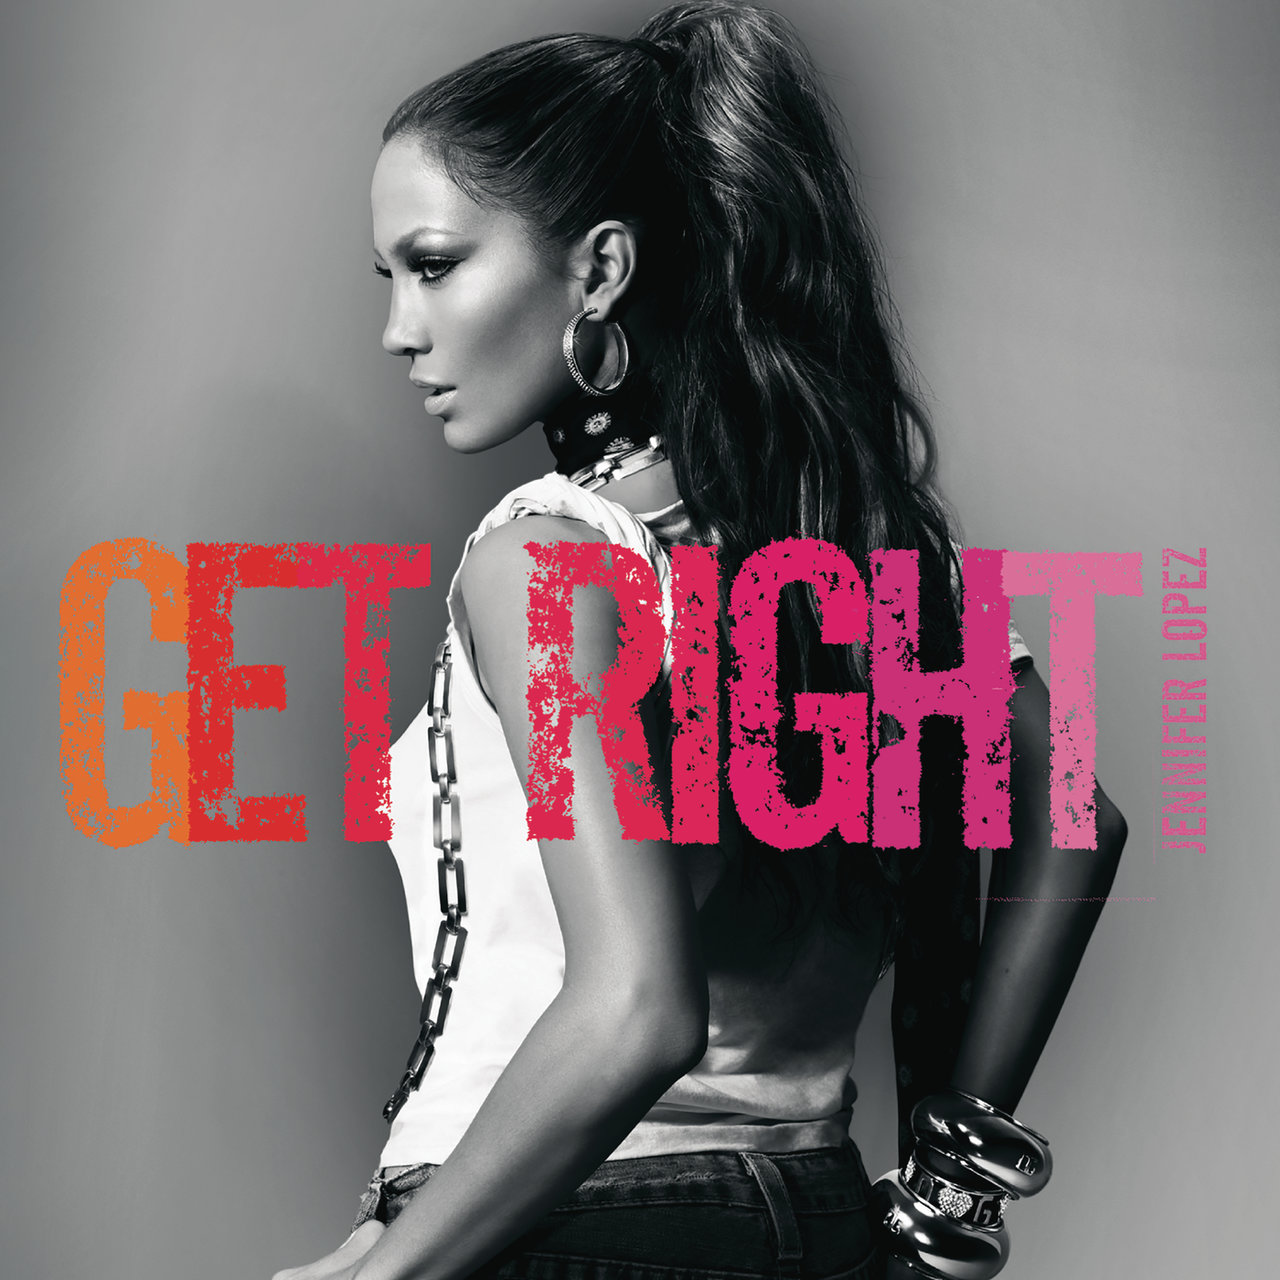 Get Right Remix EP [2005]